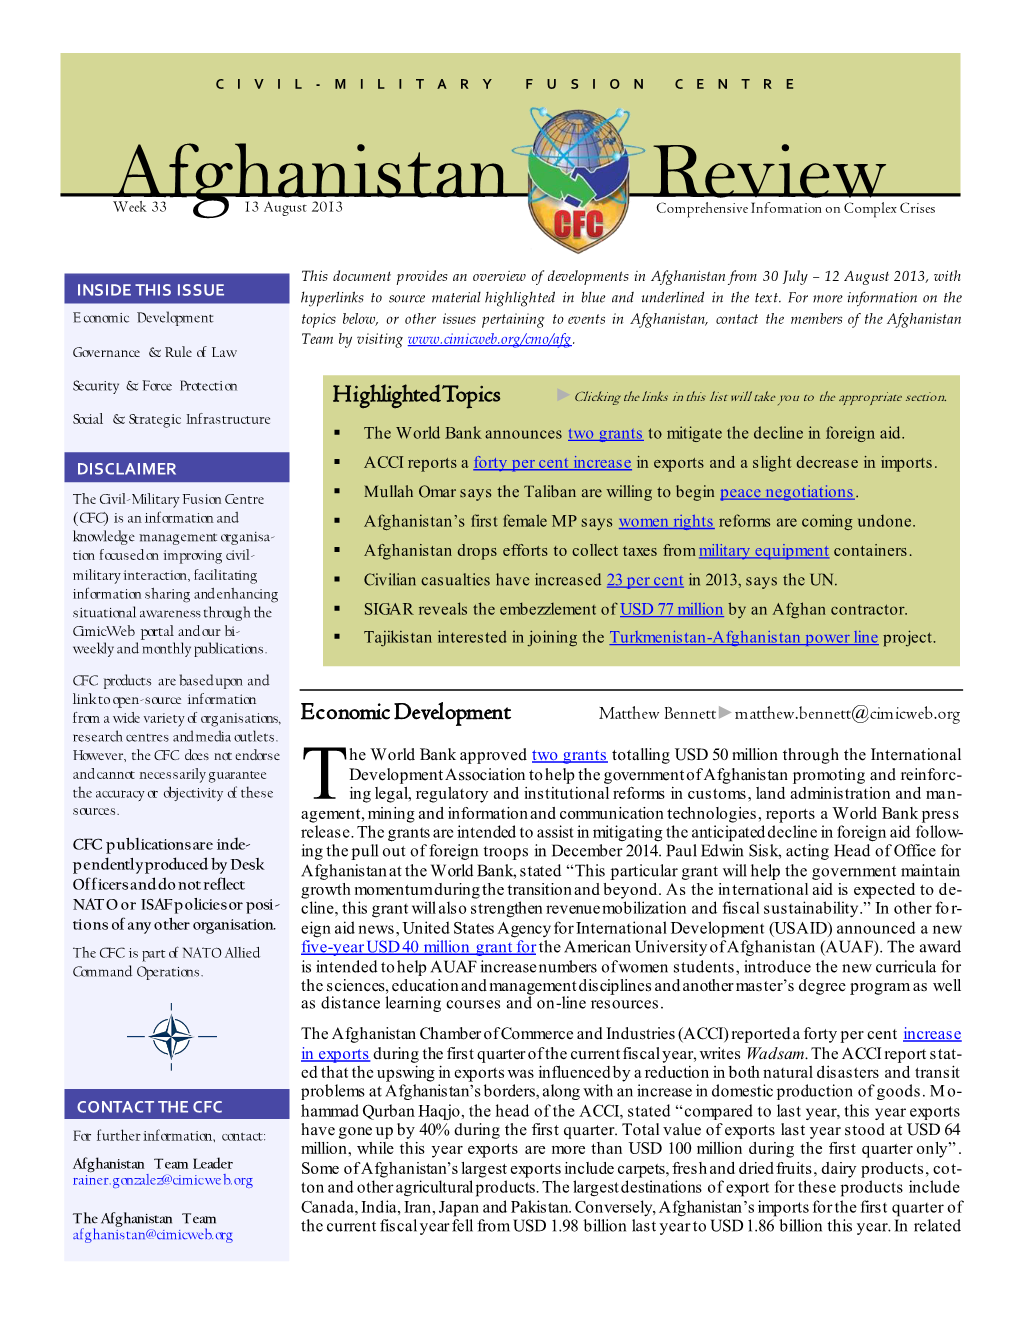 Afghanistan Review” Newsletter Should Be Relevant to the CFC’S Mission As a Knowledge Management and Information Sharing Institution